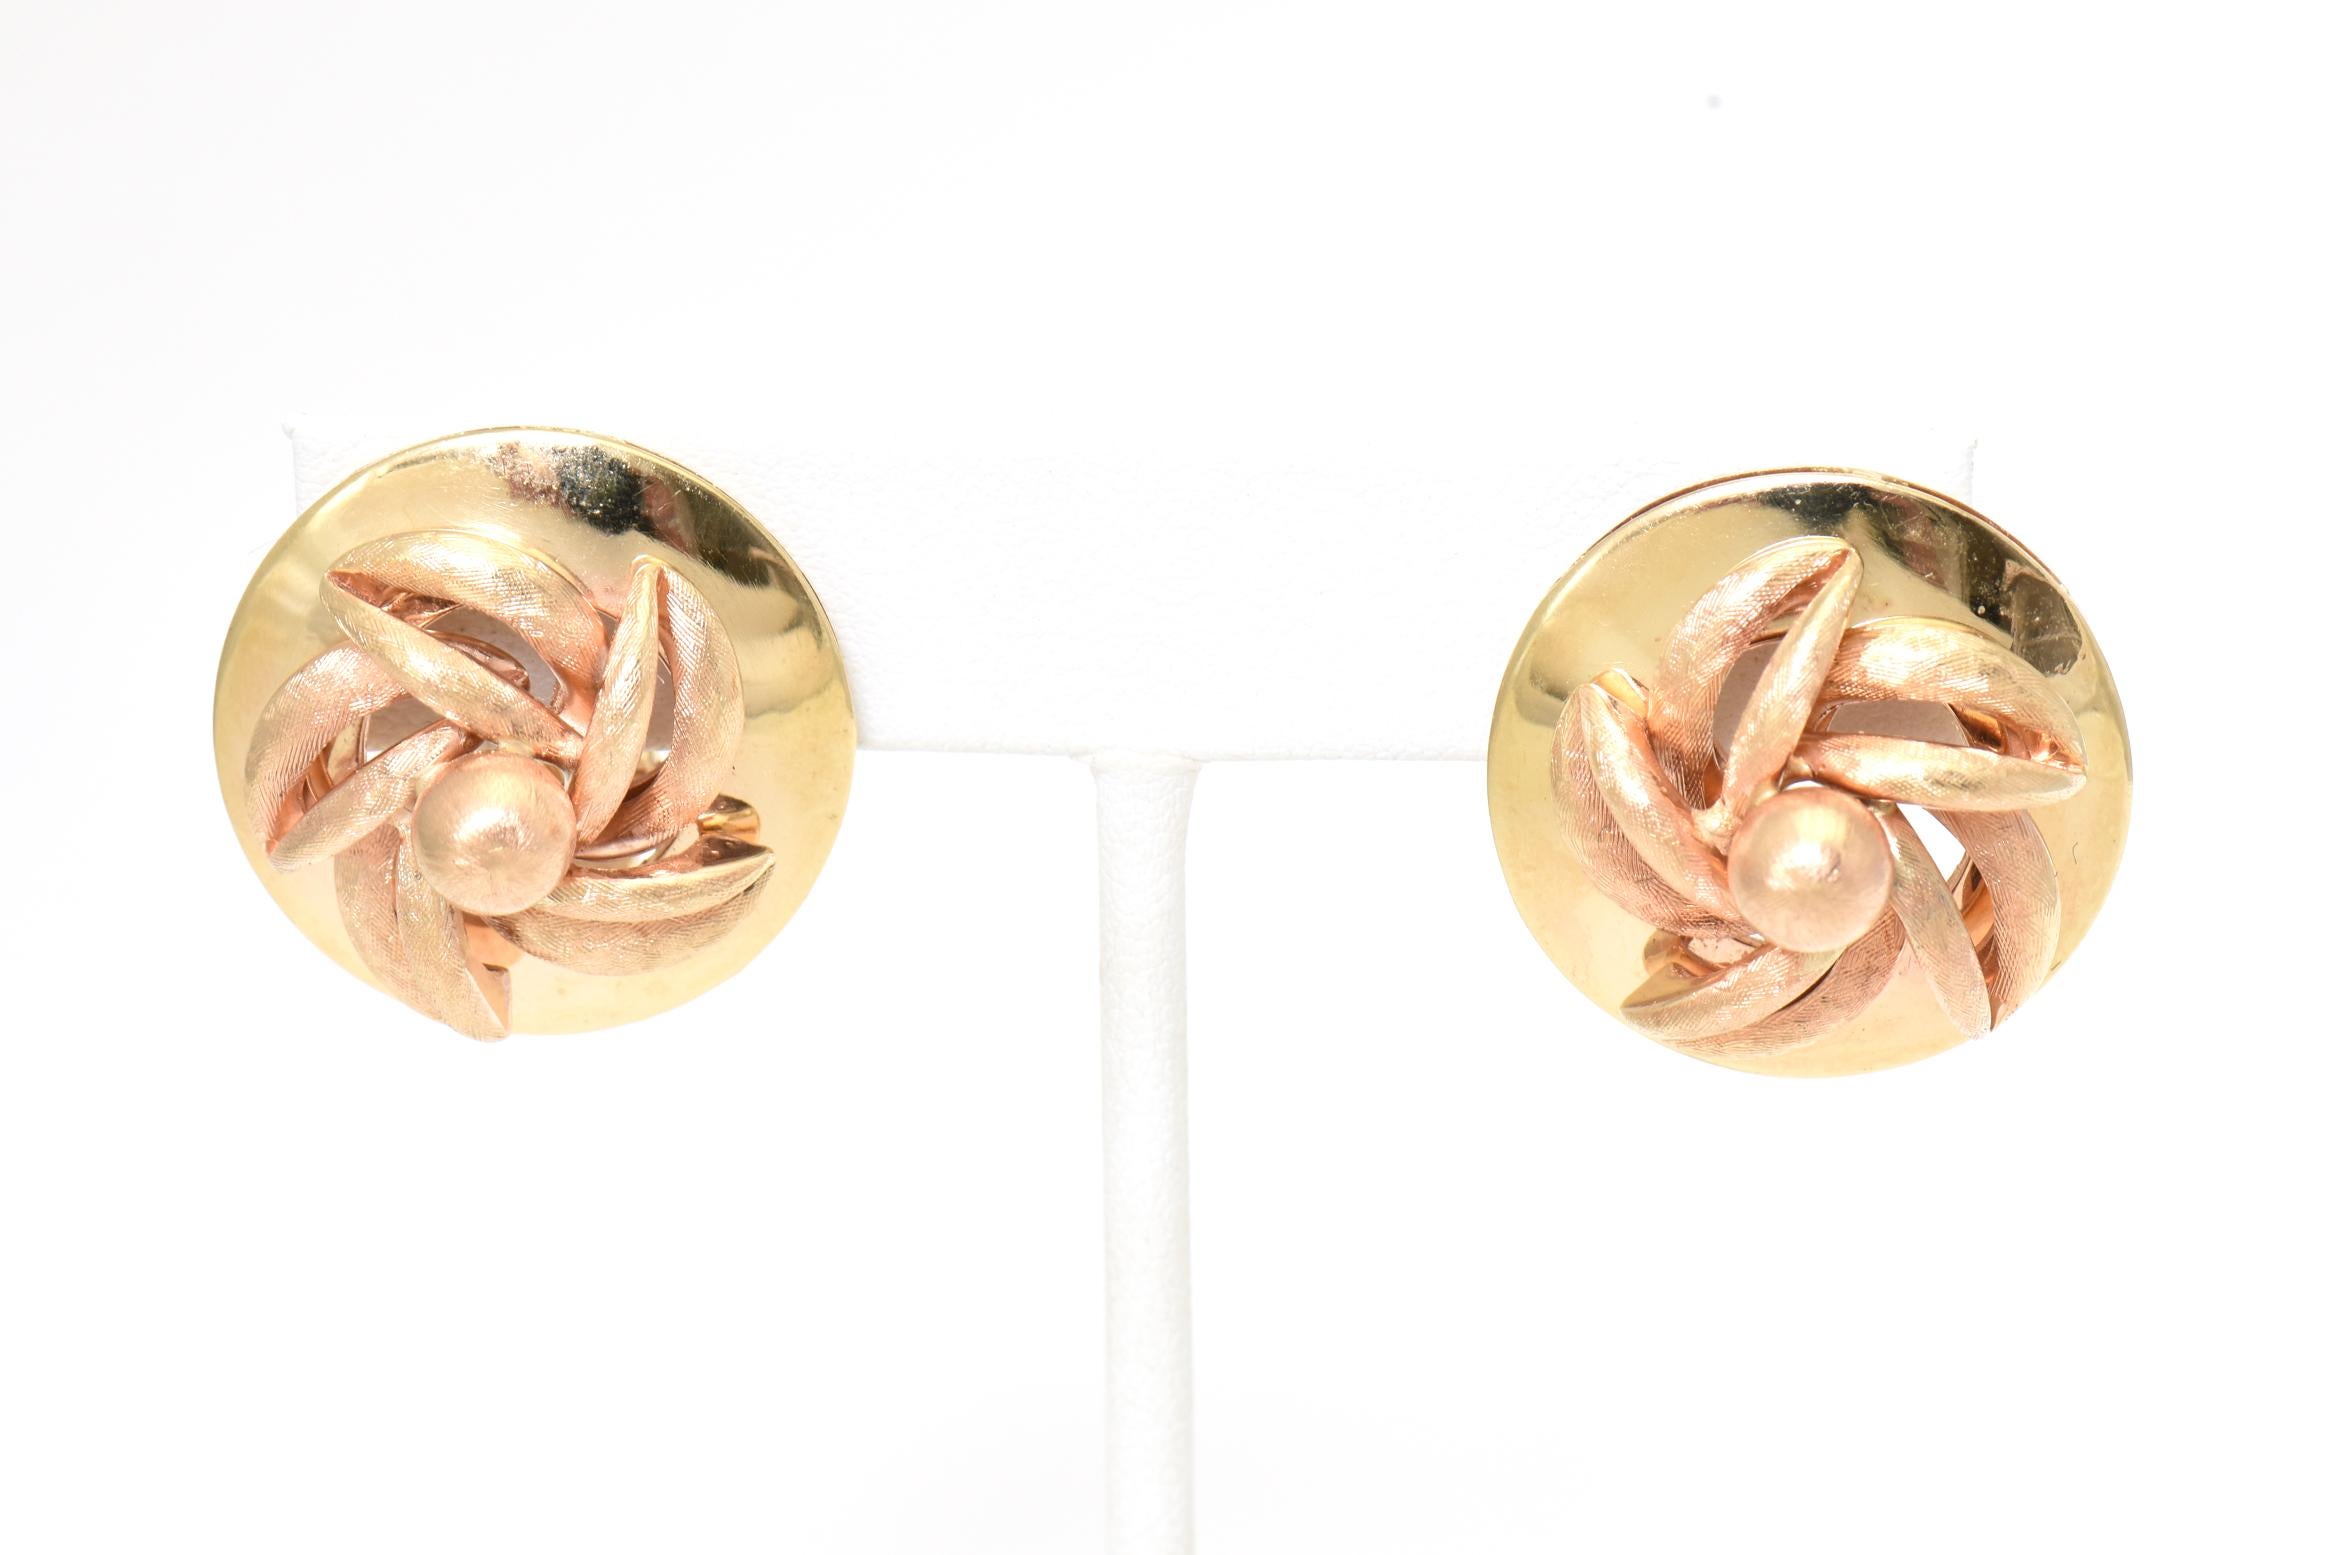 Mid century round 14K yellow gold disk earrings with an applied 14K rose gold Florentine flower. Post backs with an attached hoop. Marked 14K on the clips.
